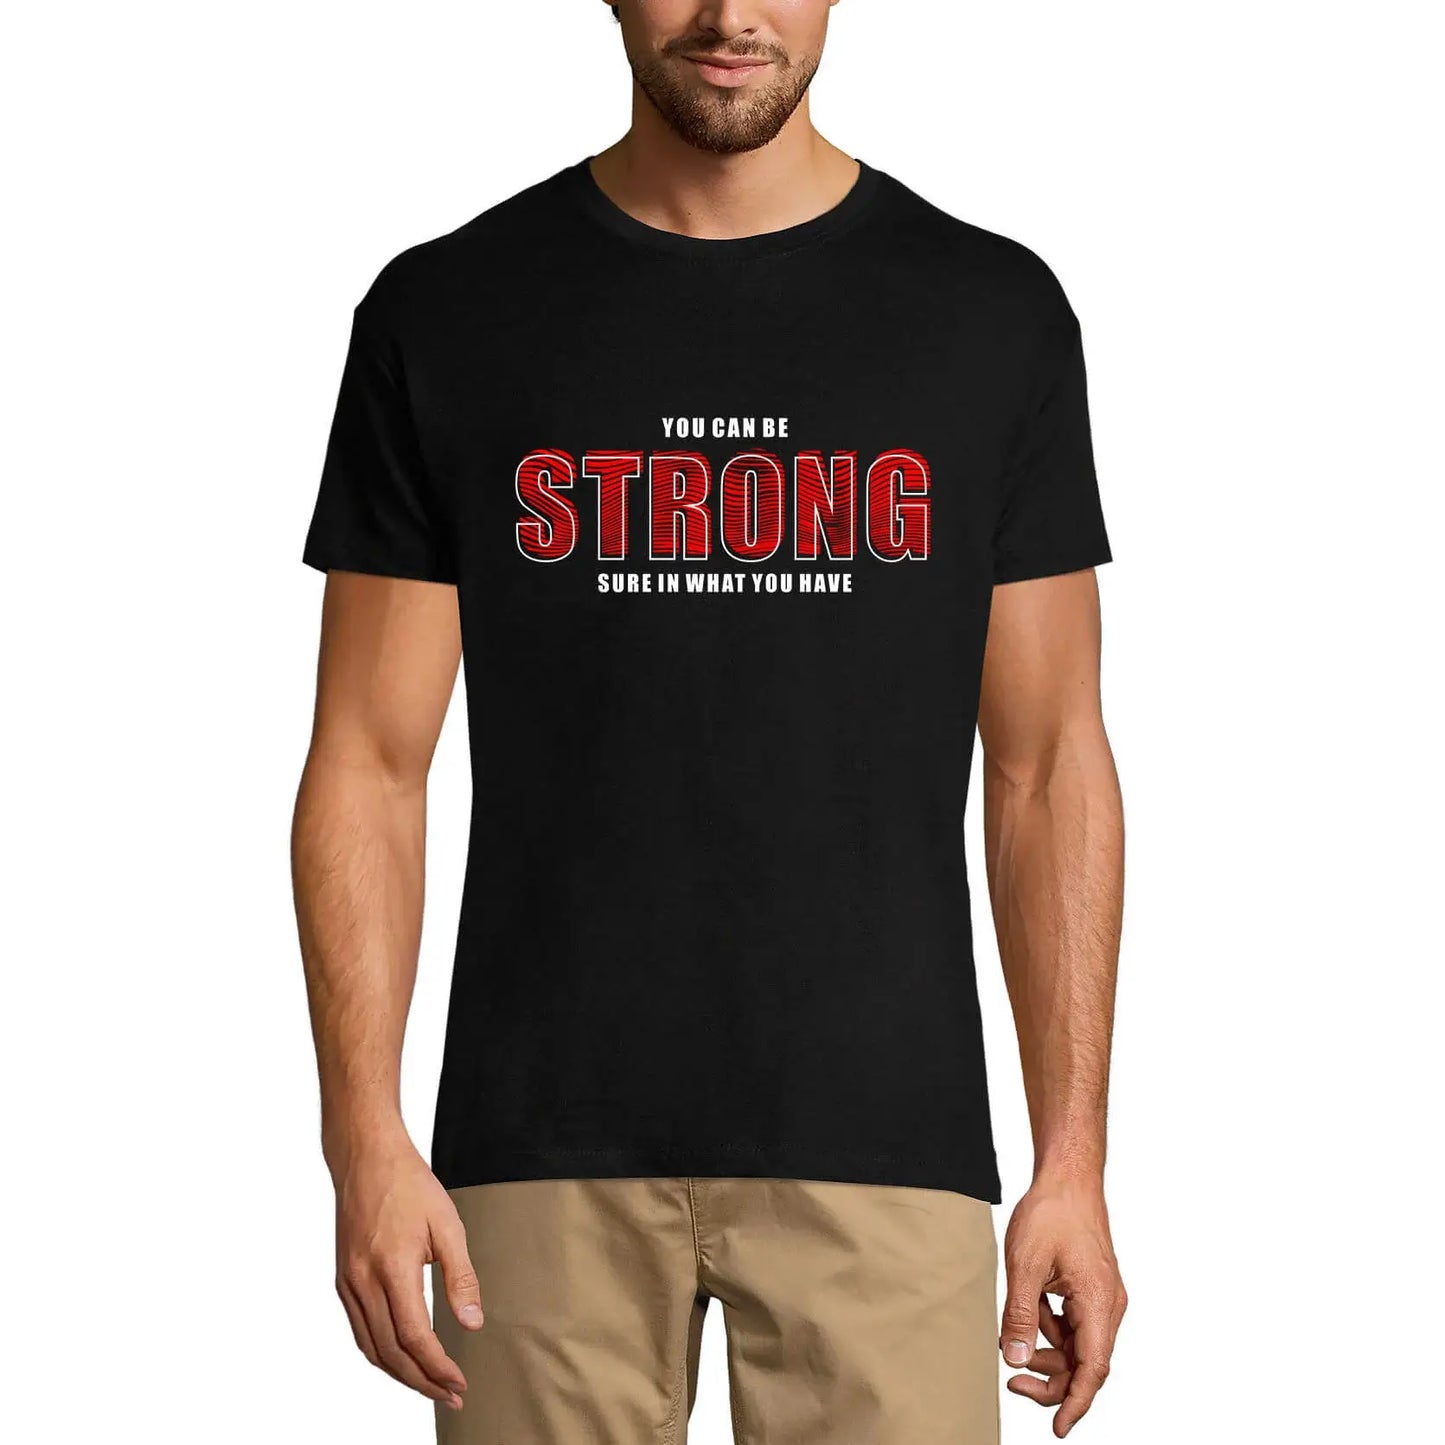 Men's Graphic T-Shirt You Can Be Strong Sure In What You Have Eco-Friendly Limited Edition Short Sleeve Tee-Shirt Vintage Birthday Gift Novelty